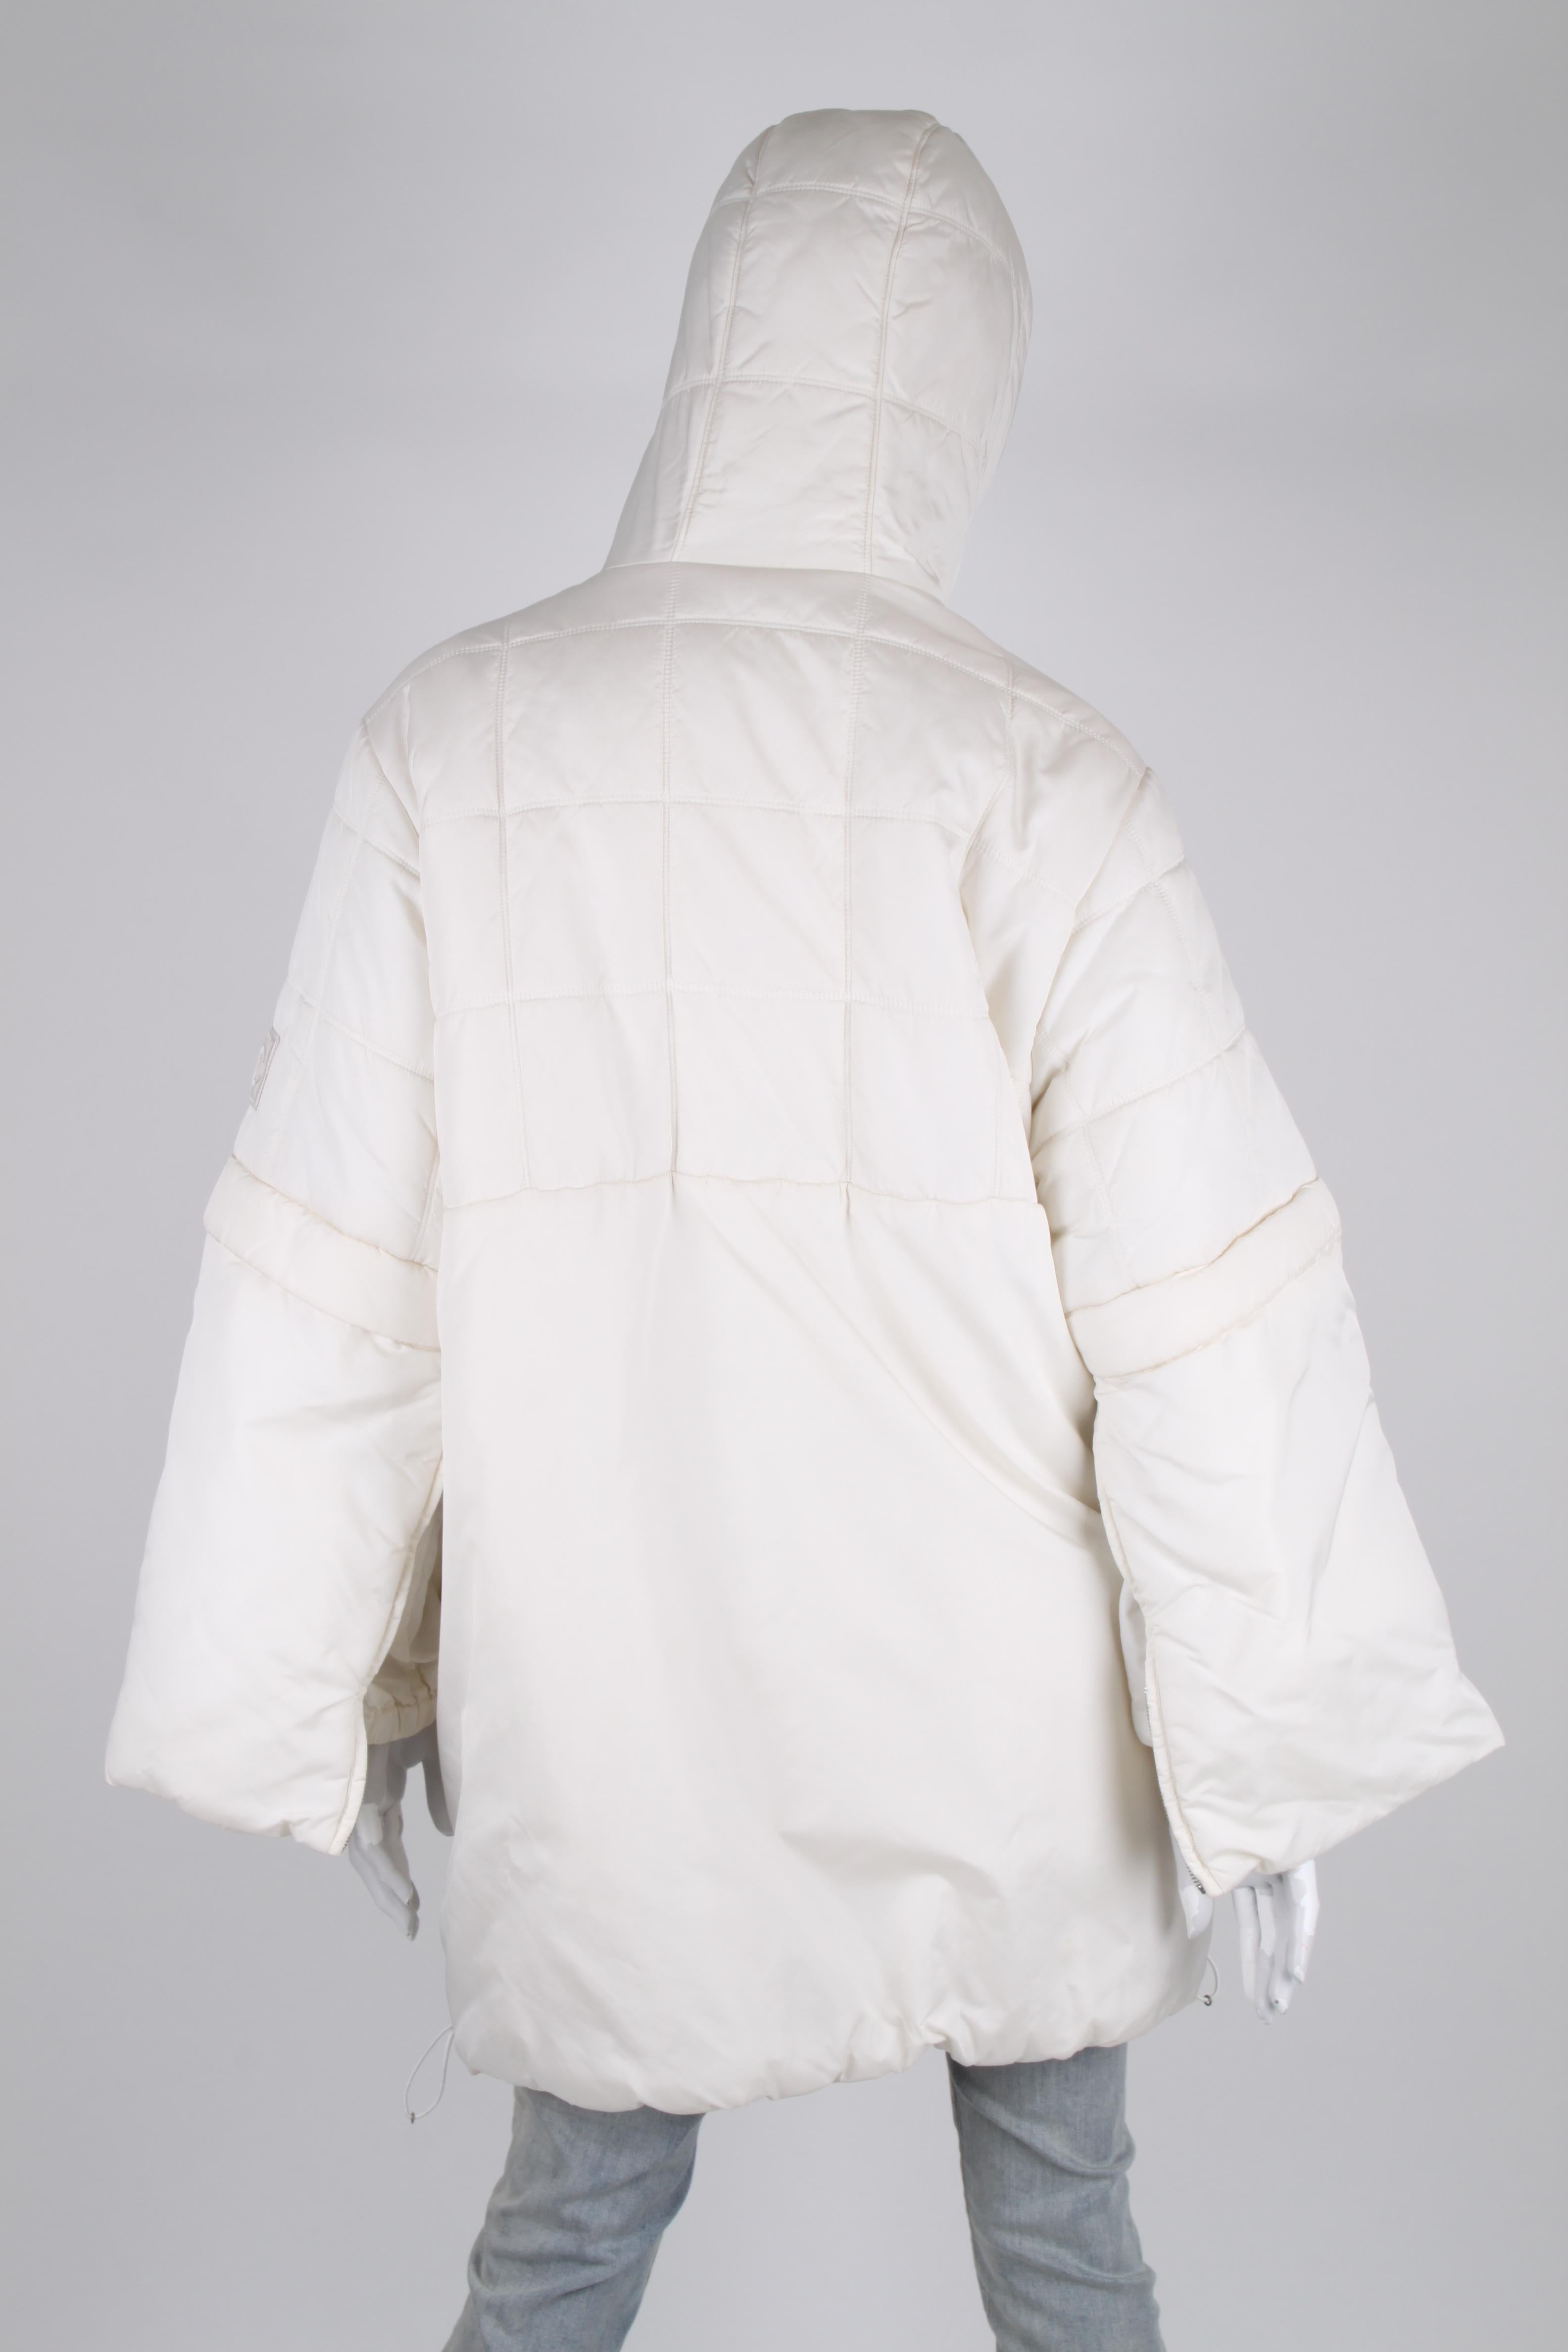 Chanel Oversized Coat - white autumn collection 2000 For Sale 4